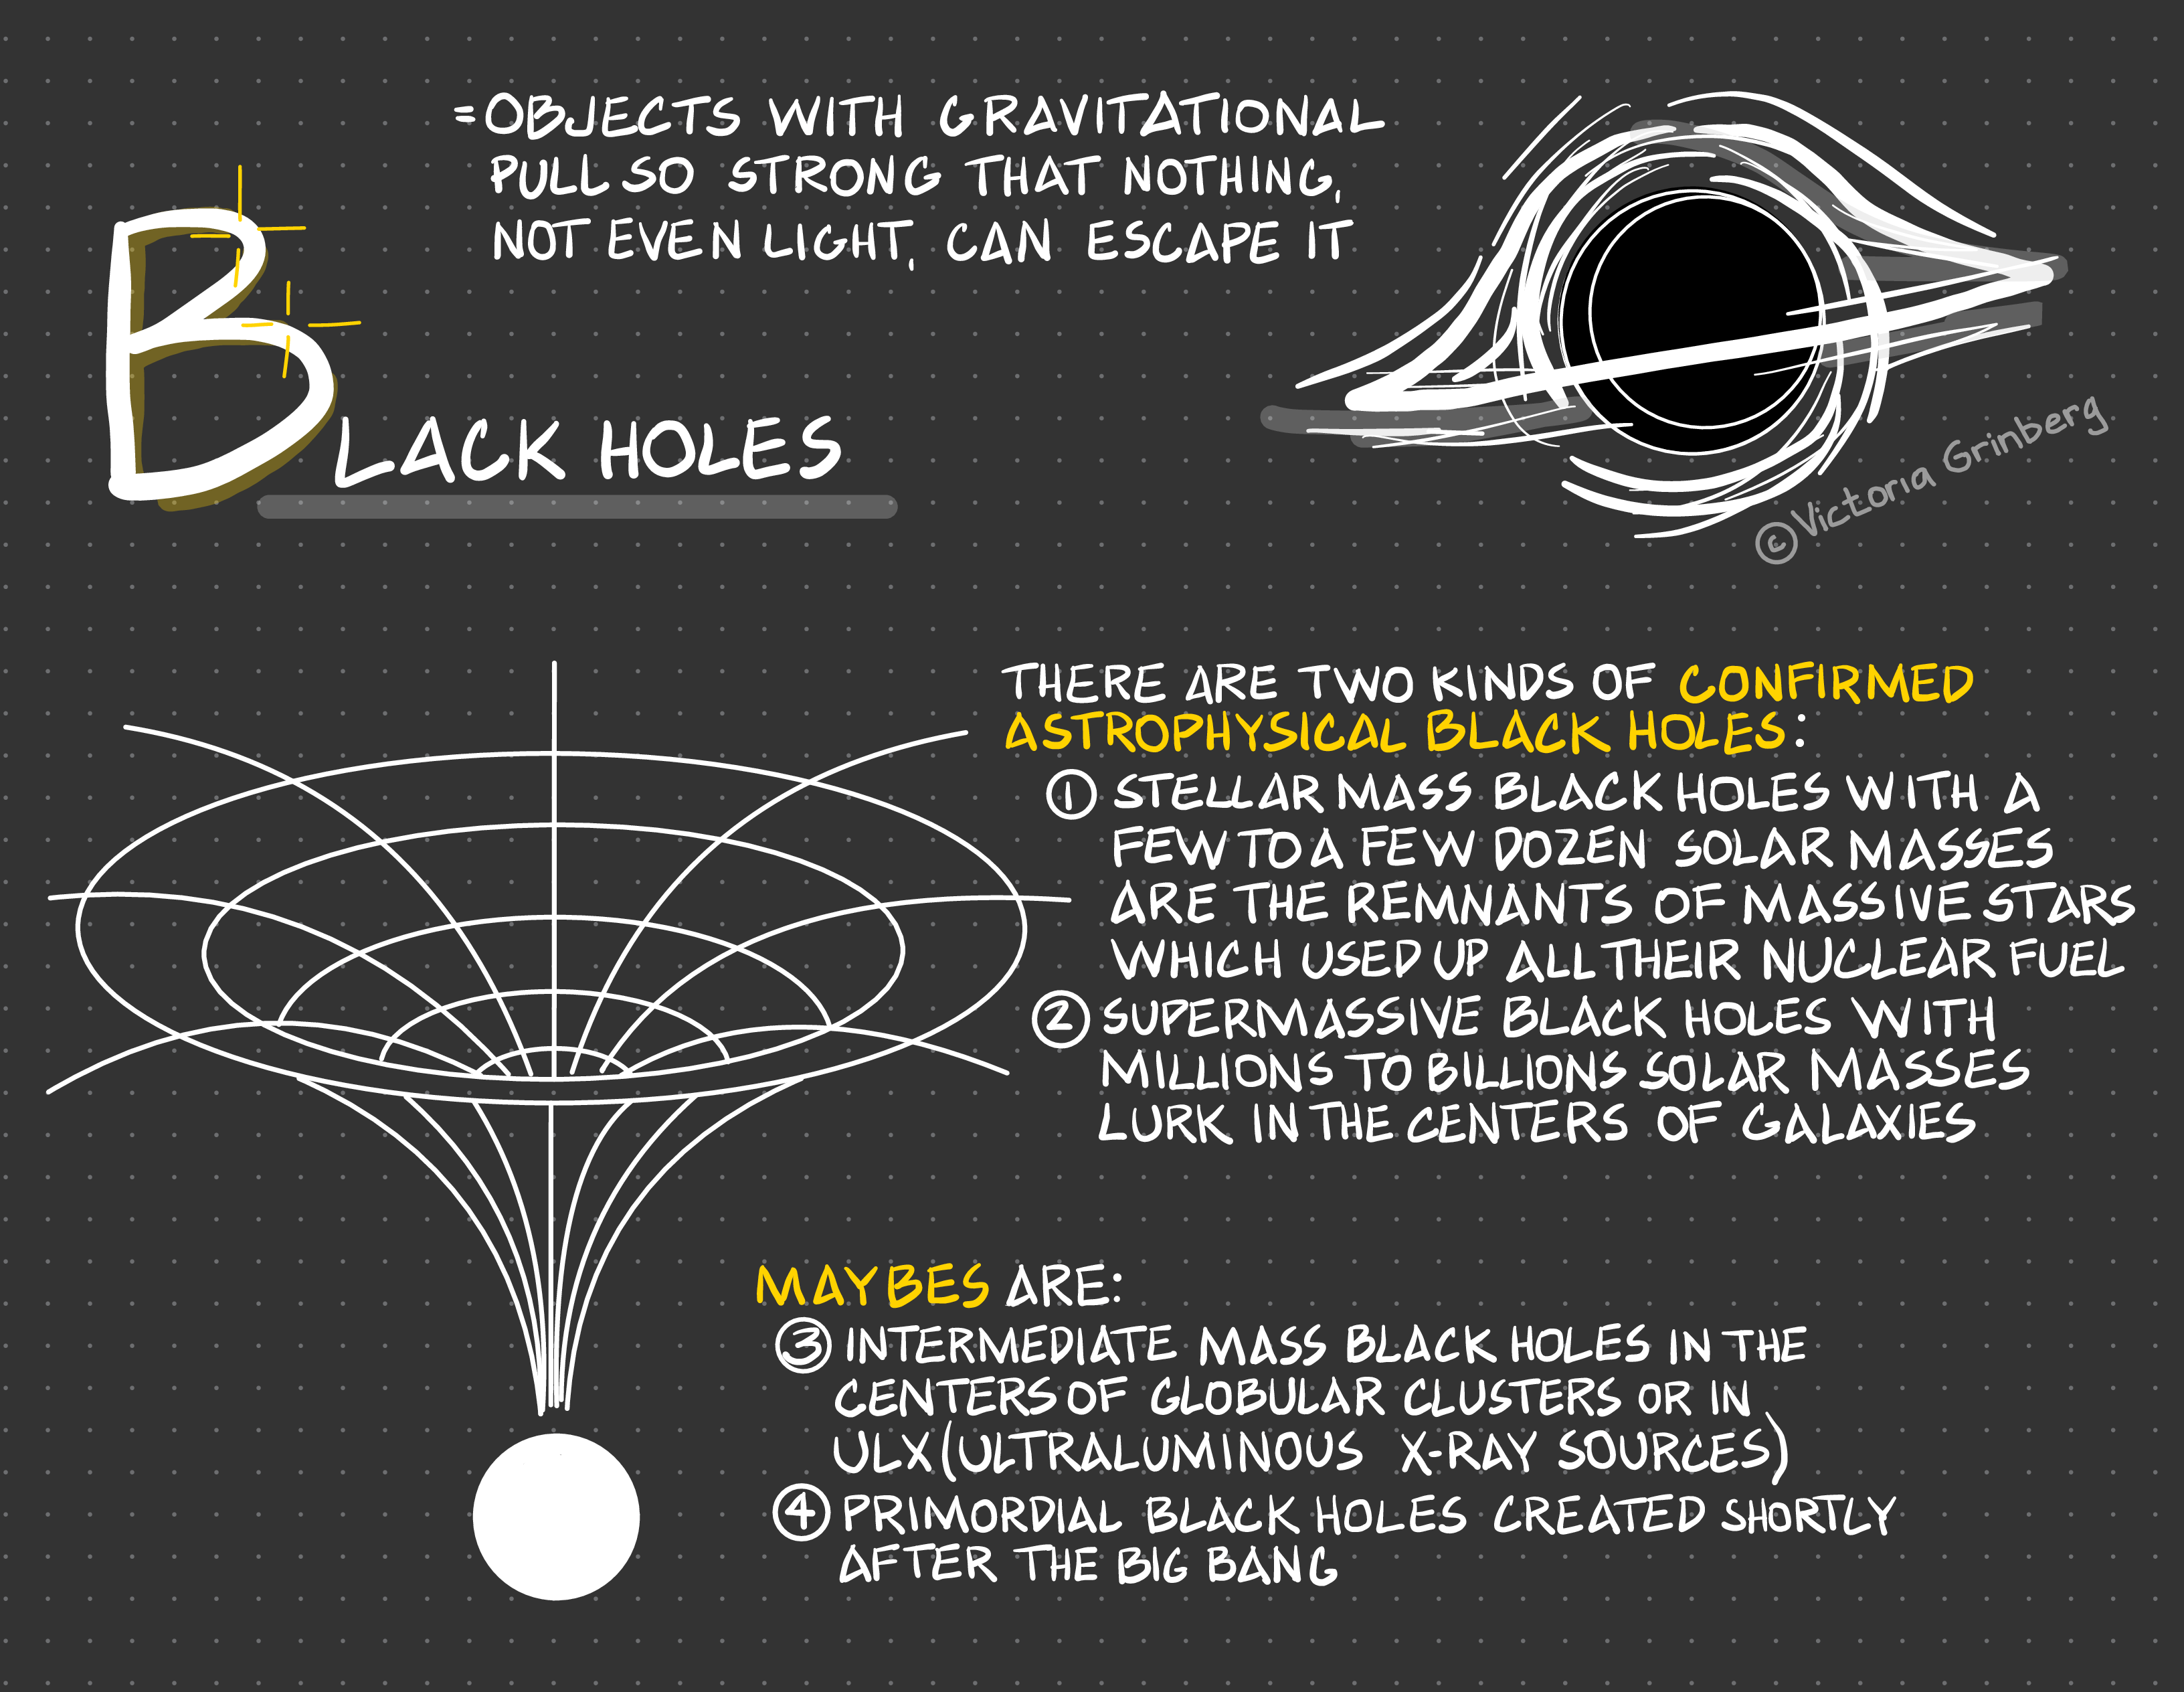 A sketchnote with white lines/text on a dark dotted paper background.First text block: Black holes = objects with gravitational pull so strong that nothing, not even light, can escape itLeft: A 2D sketch of spacetime around black hole (funnel like)Right: a sketch of the accretion disk around a  black hole, including light bending.Two more text blocks in between:First textblock:There are two kinds of confirmed black holes:1.  stellar mass black holes with a few to a few dozen solar masses are the remnants of massive stars which used up all their nuclear fuel2. supermassive black holes with millions to billions solar masses lurk in the centers of galaxiesSecond textblock:Maybes are:3. intermediate mass black holes in the centers of globular clusters or in ULX (ultraluminous X-ray sources)4. primordial black holes created shortly after the Big Bang